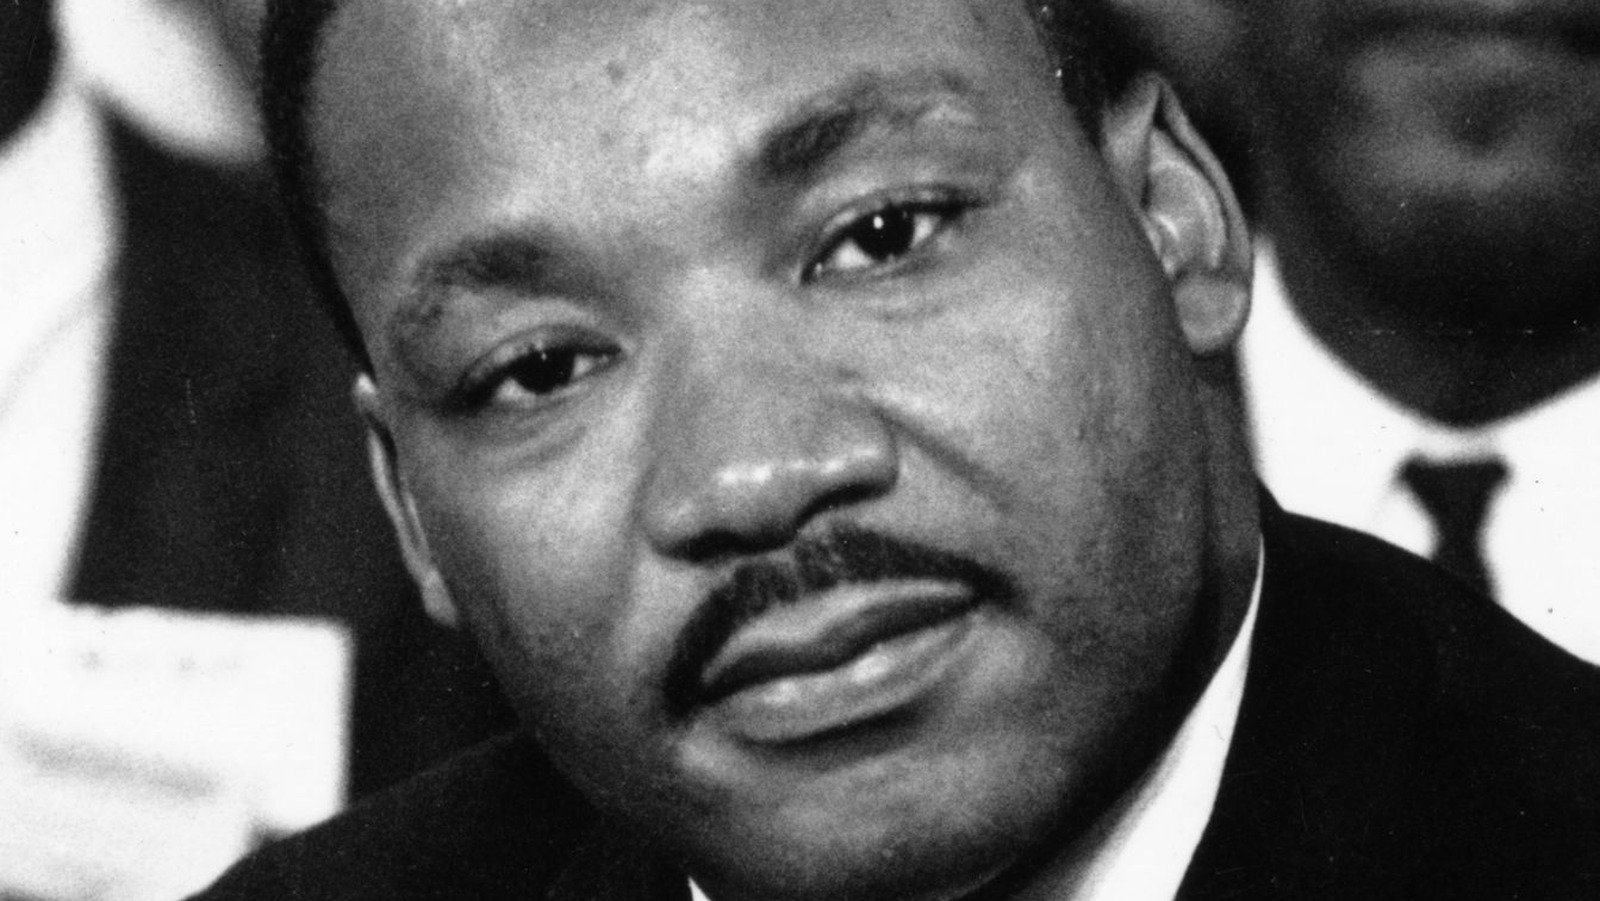 The Startling Reason Martin Luther King Jr's Family Met With Convicted Killer James Earl Ray